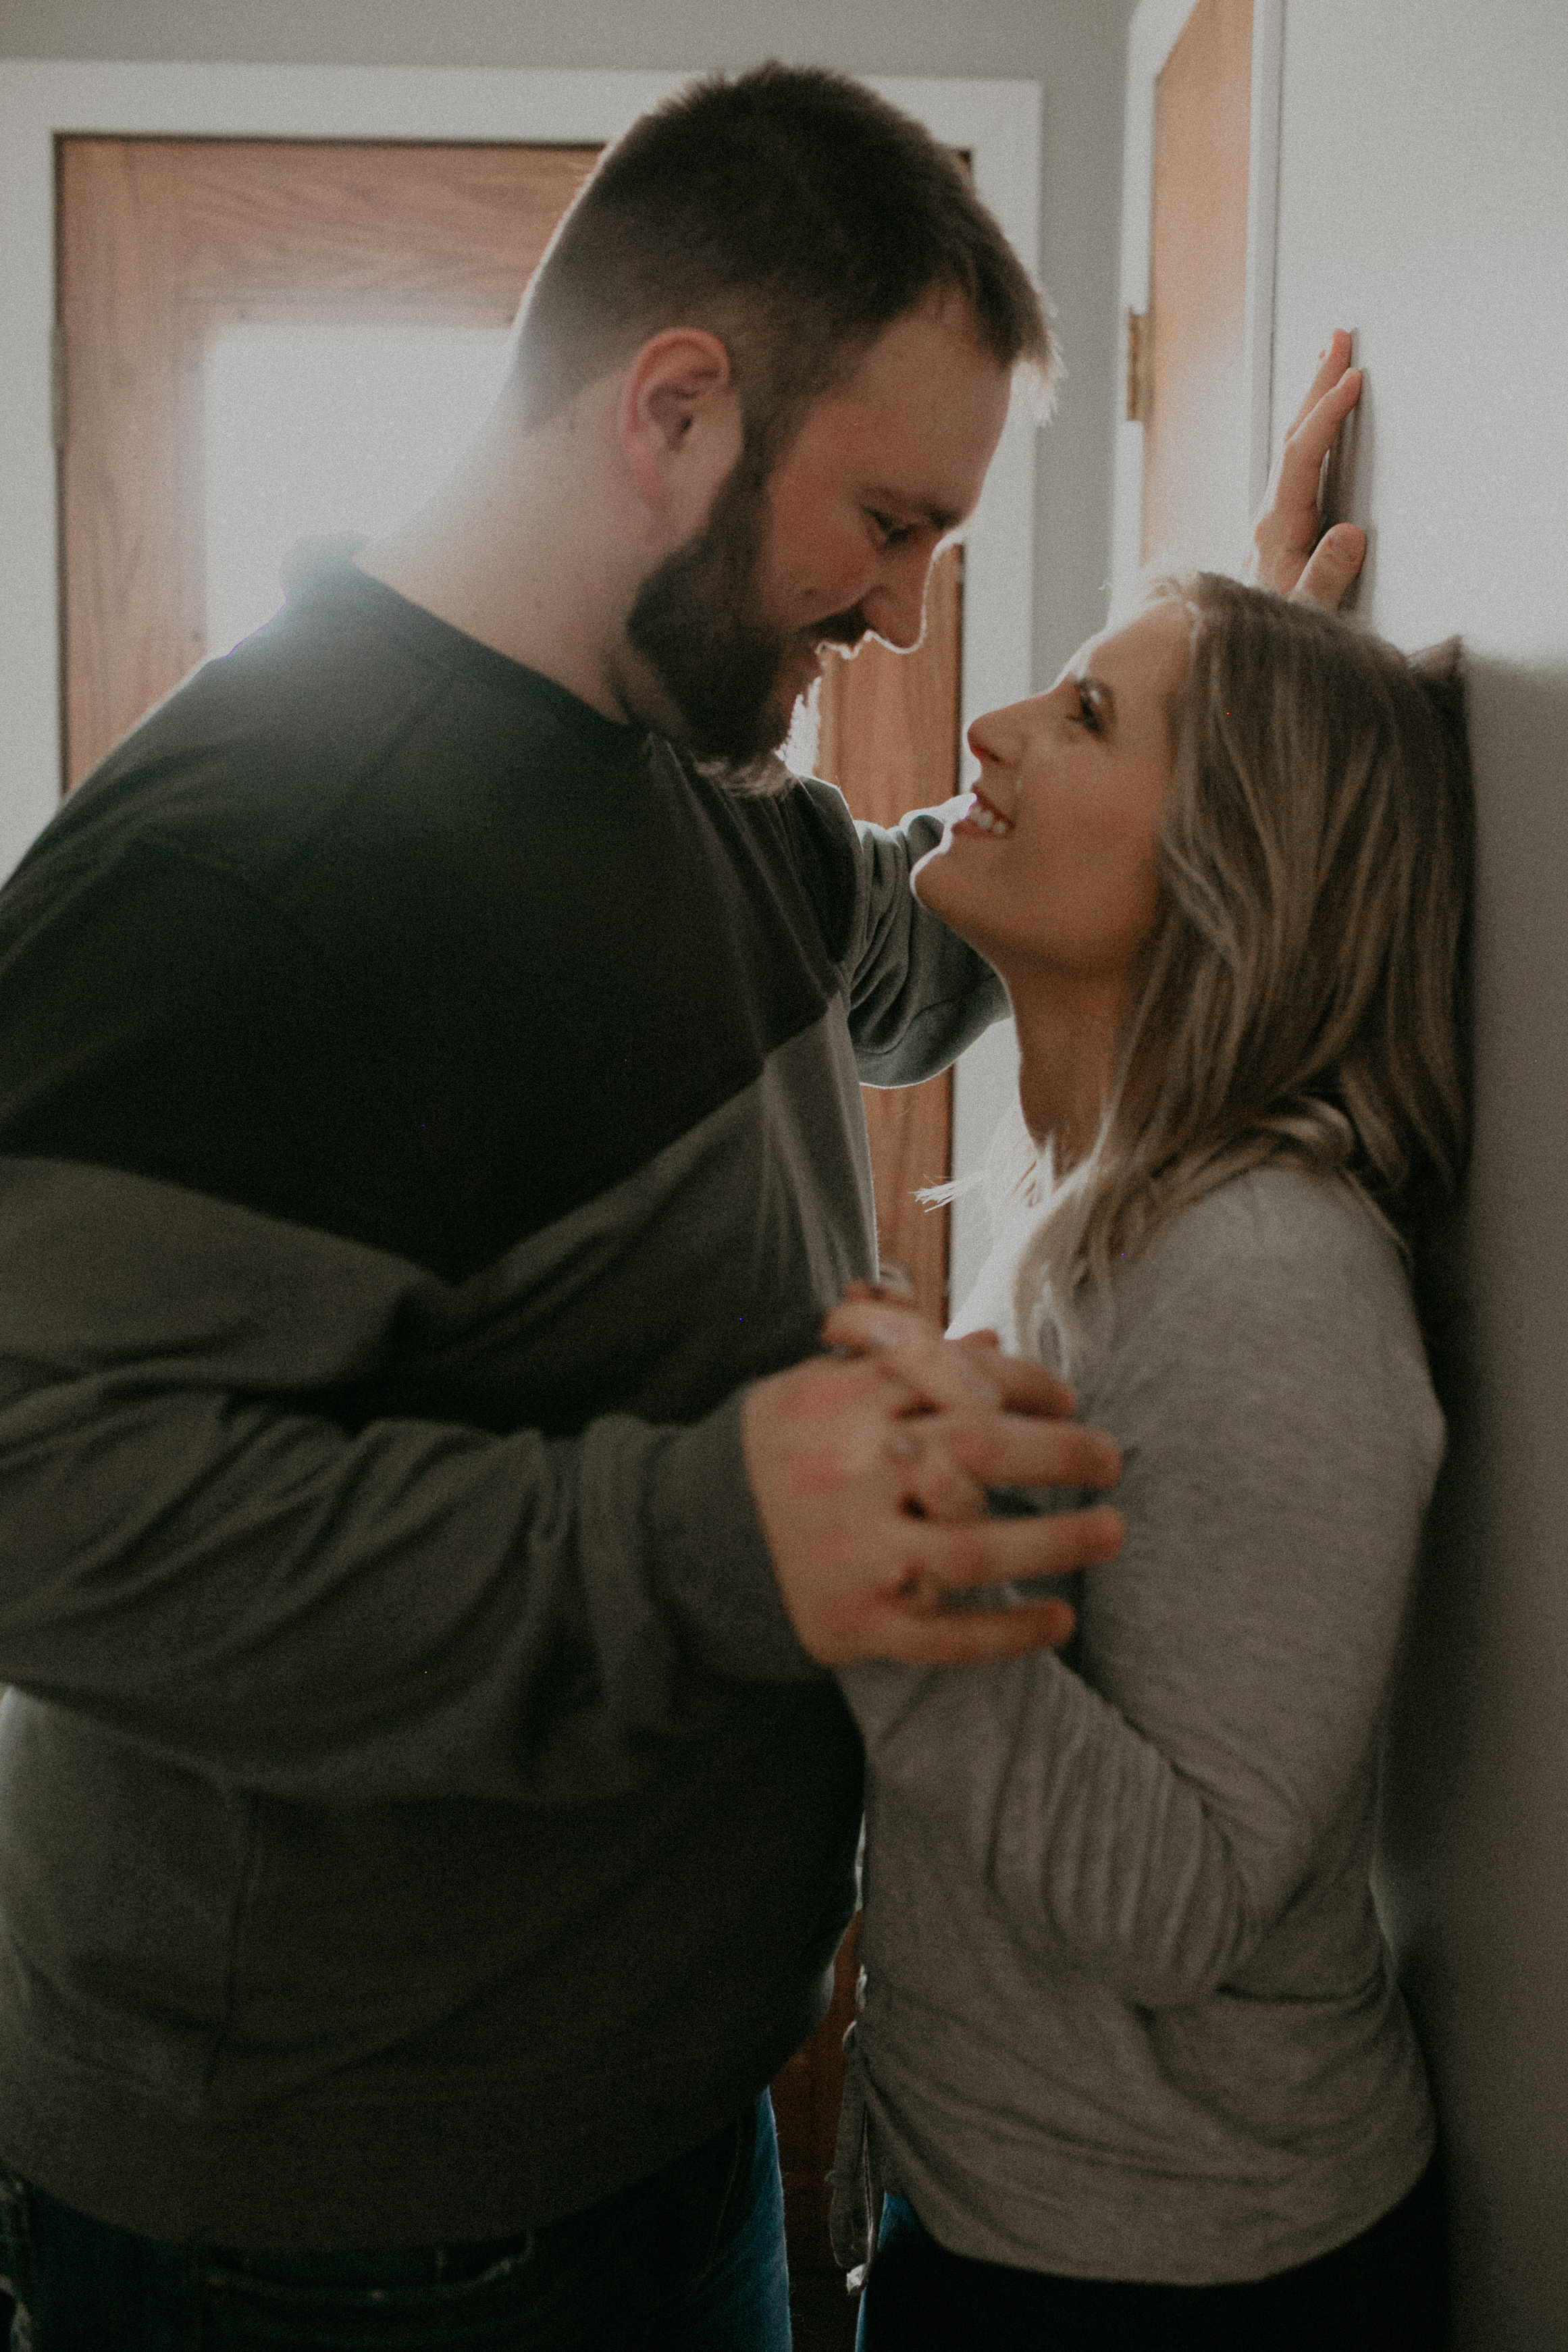  fiance lovingly stares at her soon-to-be husband during engagement photos in their home 